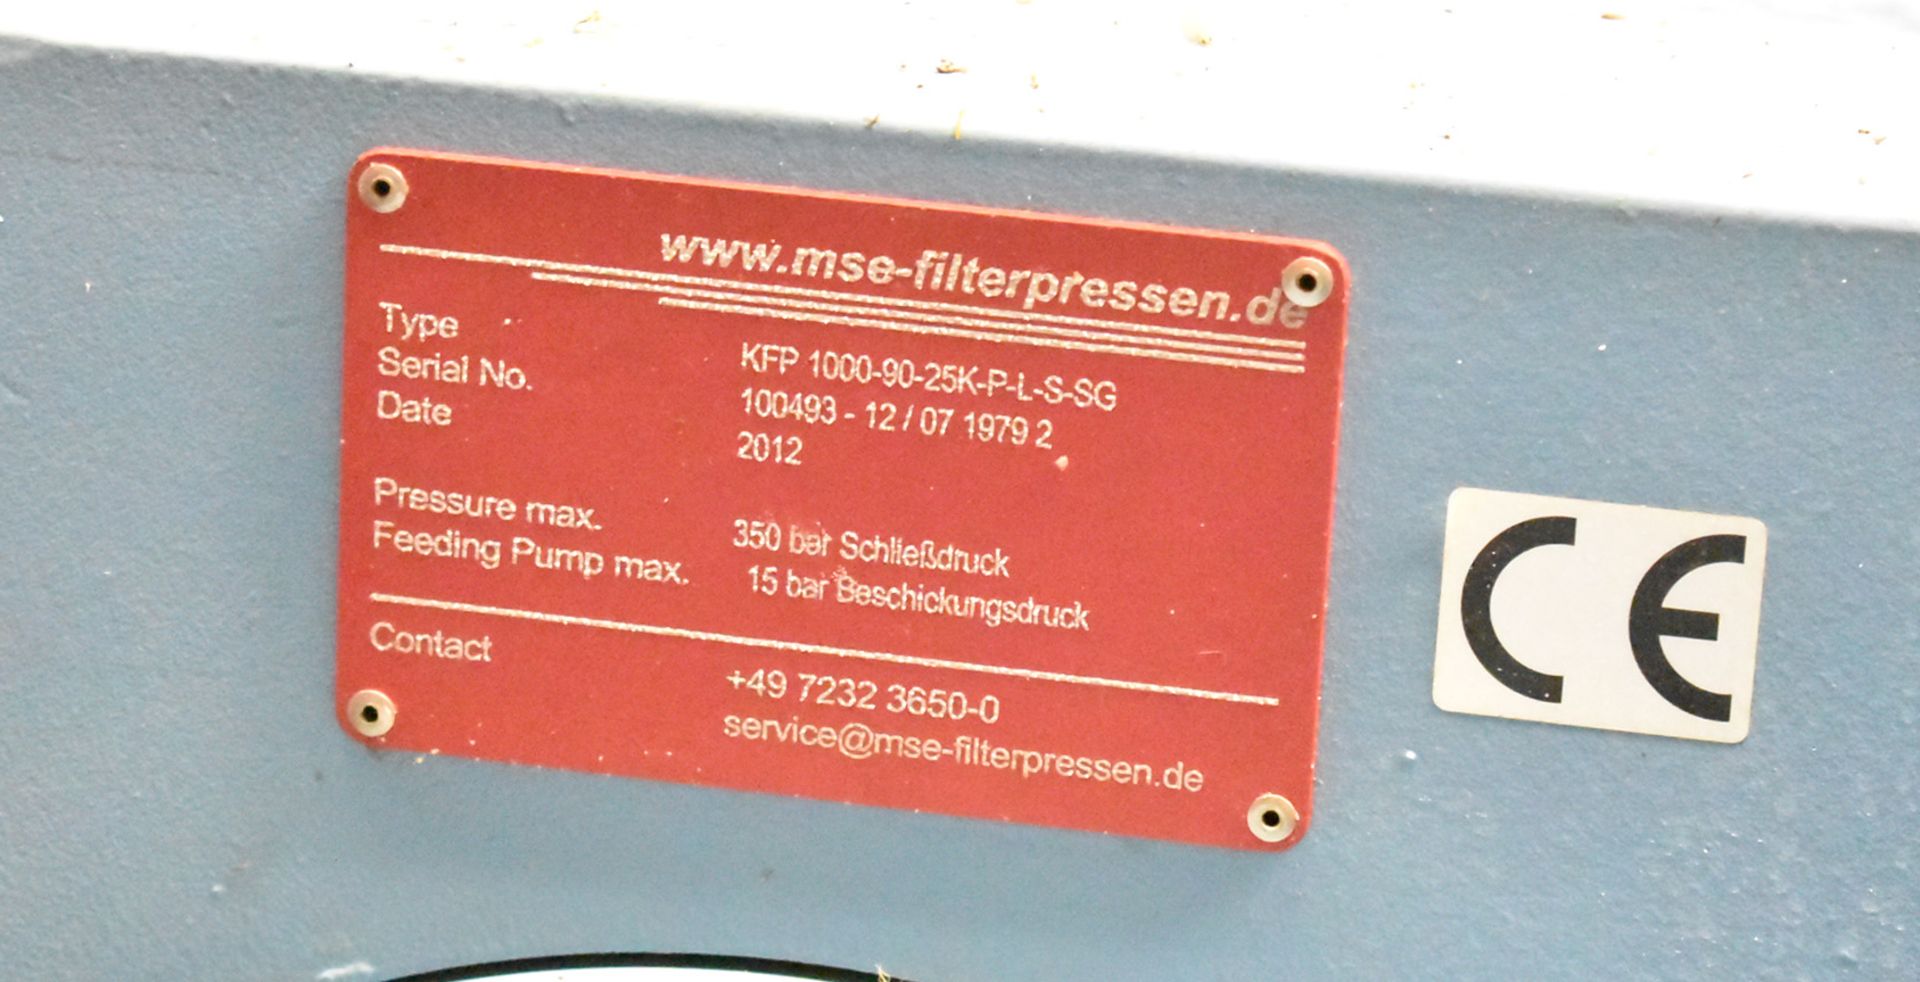 MSE FILTERPRESSEN (2012) KFP 1000-90-25K-P-L-S-SG HYDRAULIC FILTER PRESS WITH SIEMENS SIMATIC - Image 3 of 8